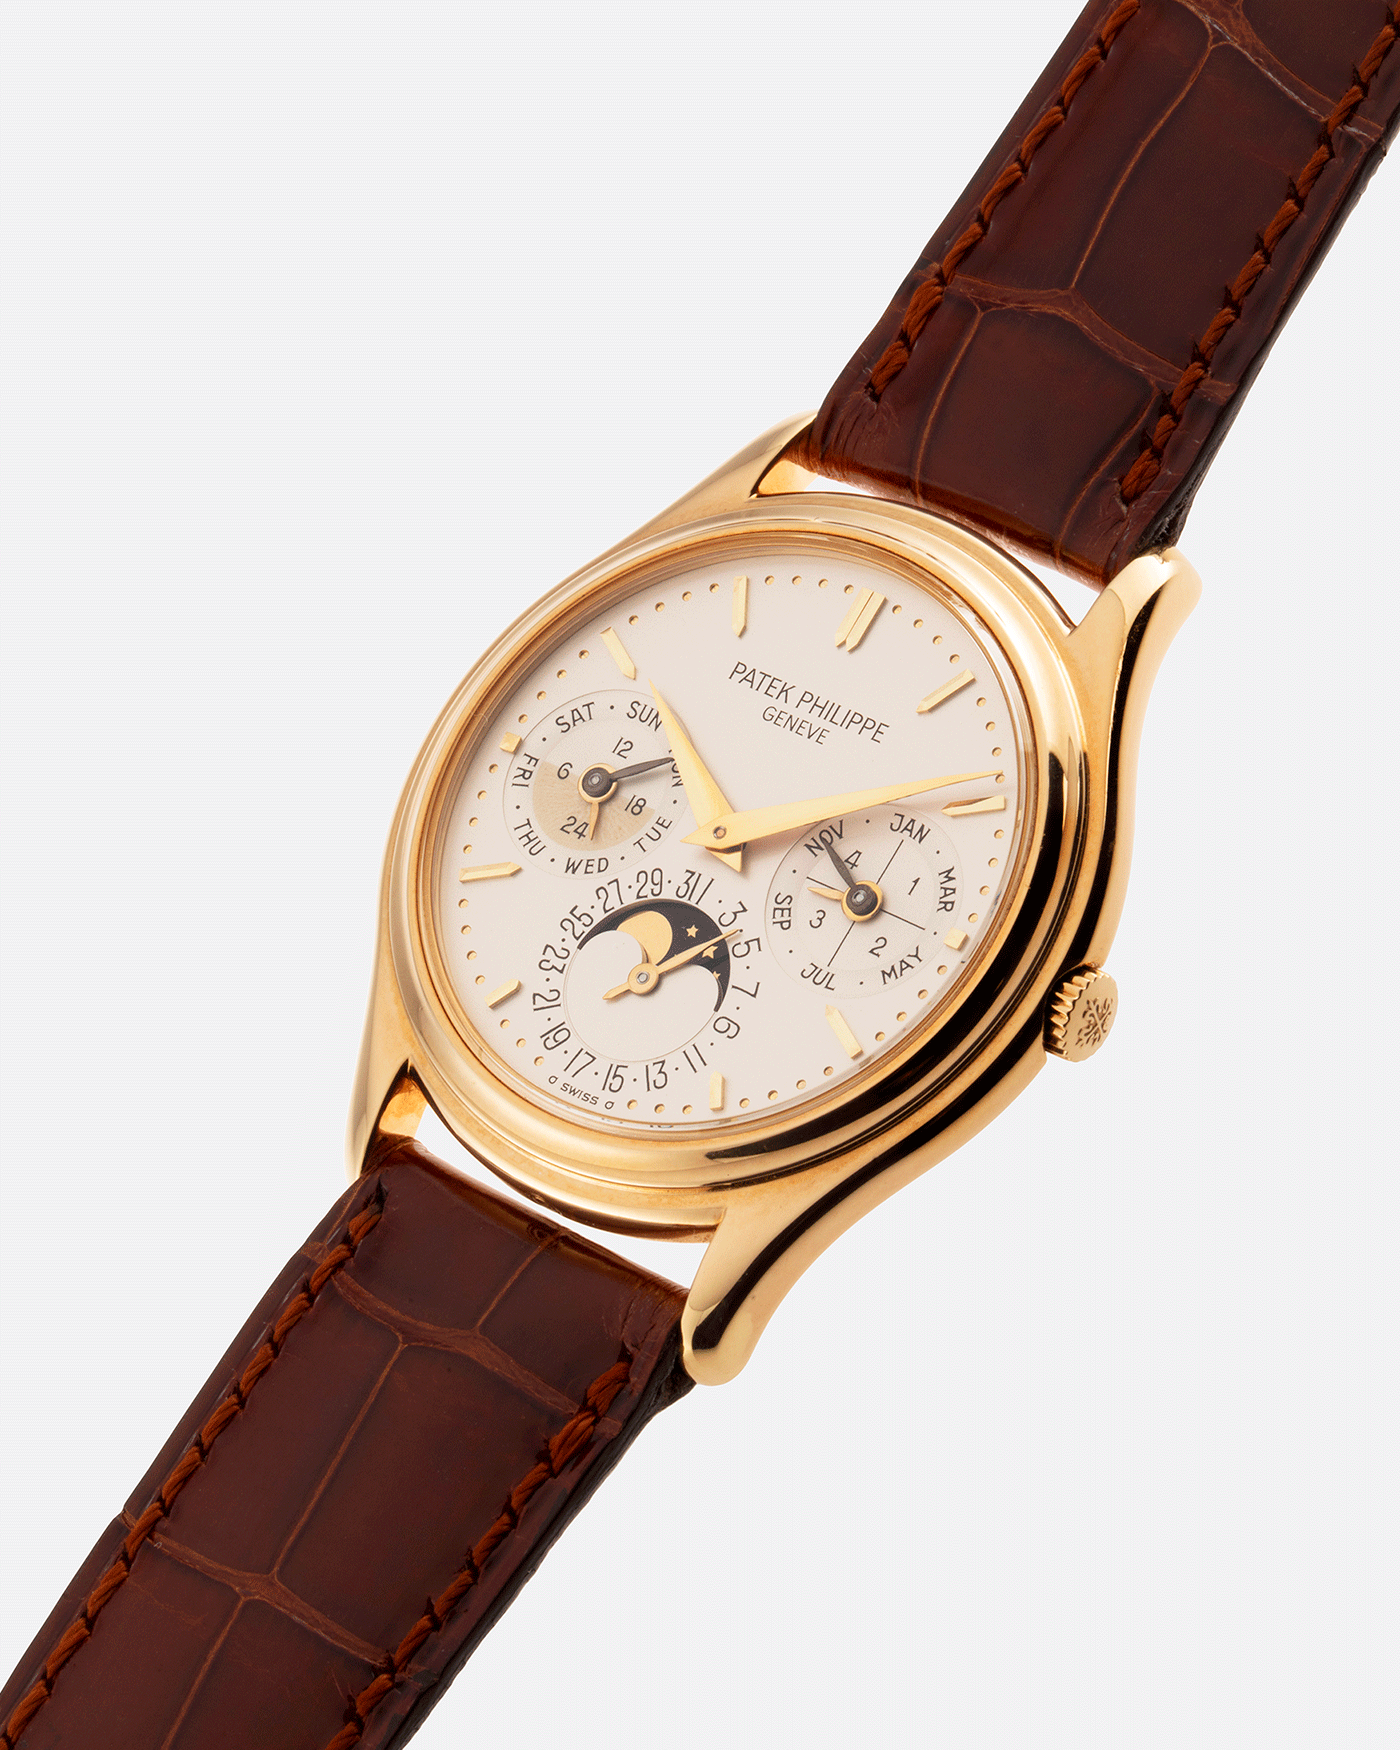 Brand: Patek Philippe Year: 1990’s Model: Perpetual Calendar Reference Number: 3940J Material: 18k Yellow Gold Movement: Cal 240Q Case Diameter: 36mm Bracelet: A Collected Man Chestnut Brown Textured Calf Strap and Patek Philippe Chestnut Brown Alligator Strap with 18k Yellow Gold Patek Philippe Tang Buckle